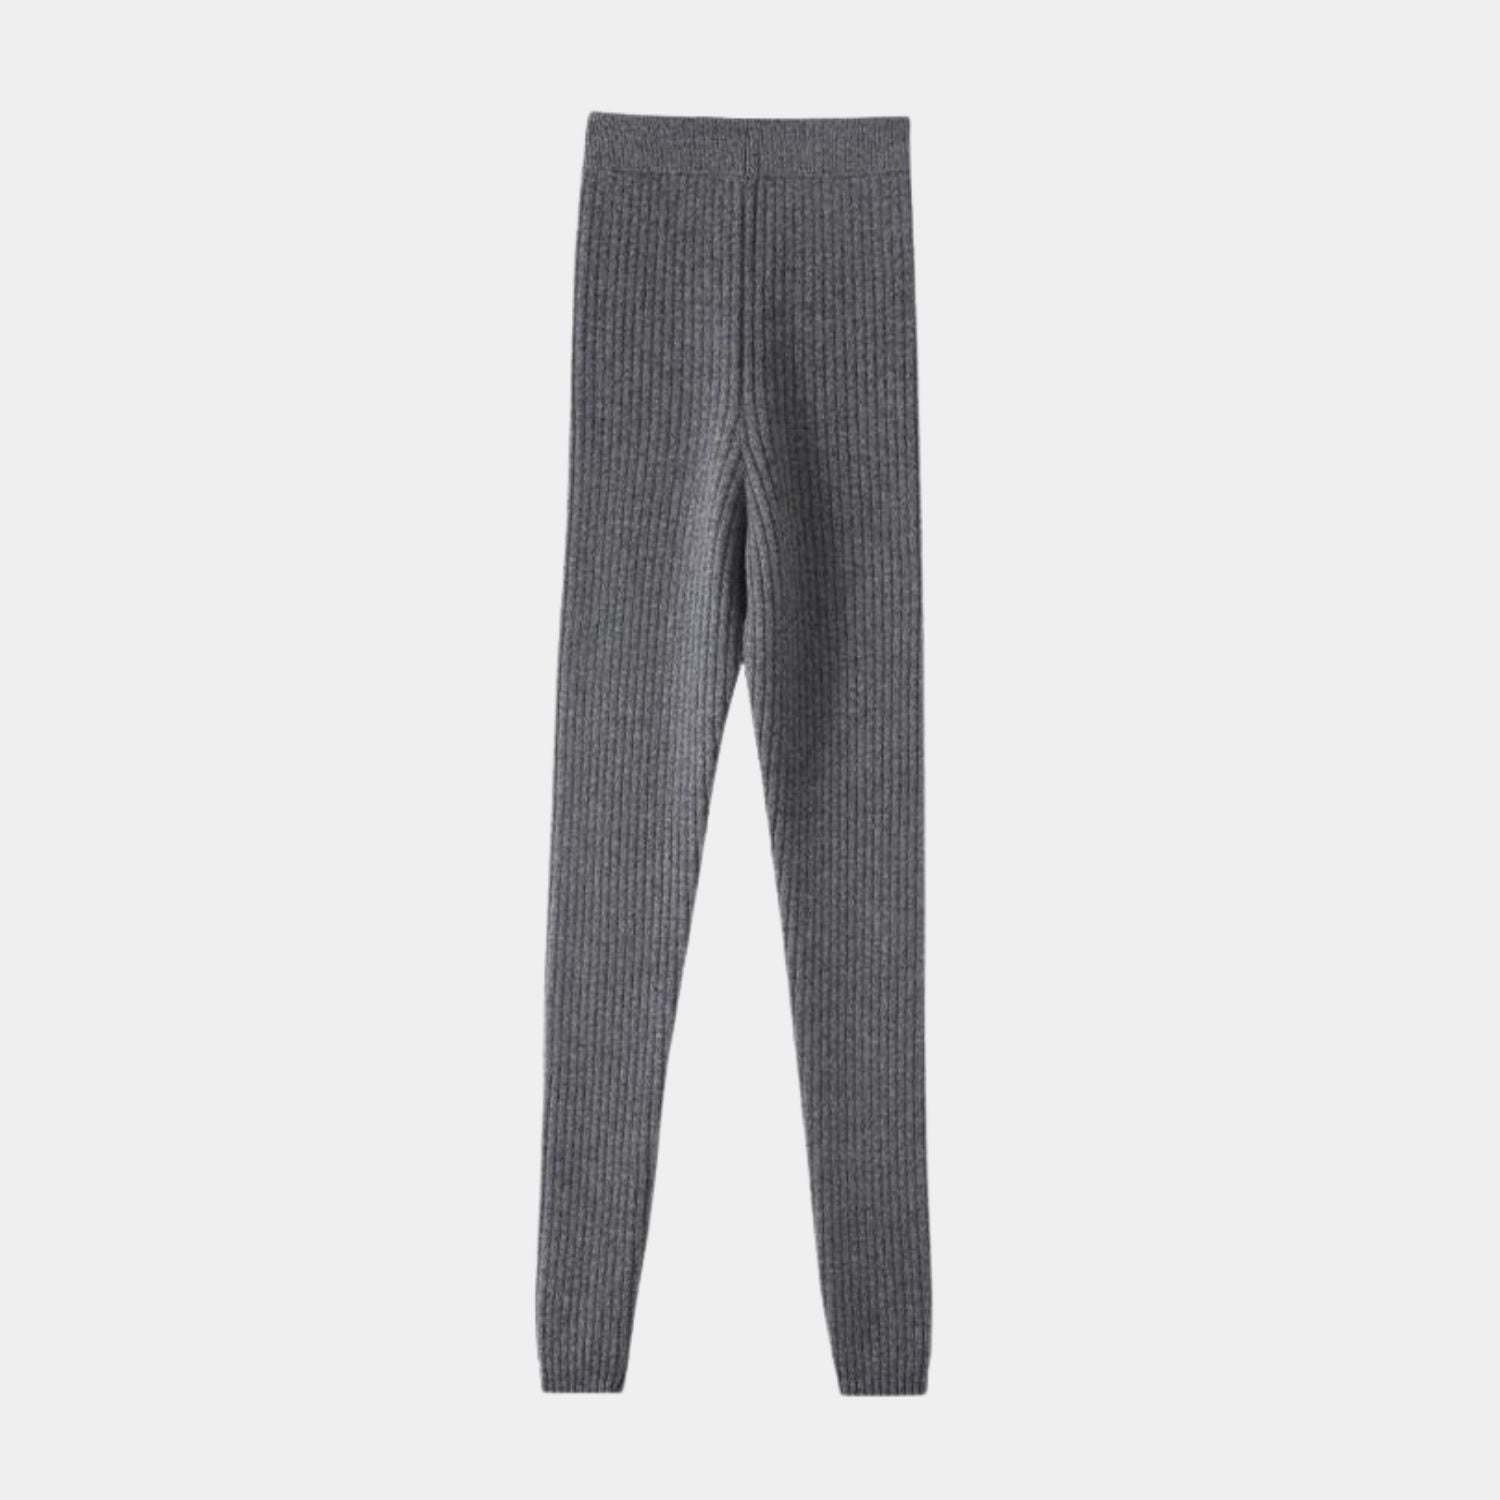 Cashmere knit leggings, Fitted Pants